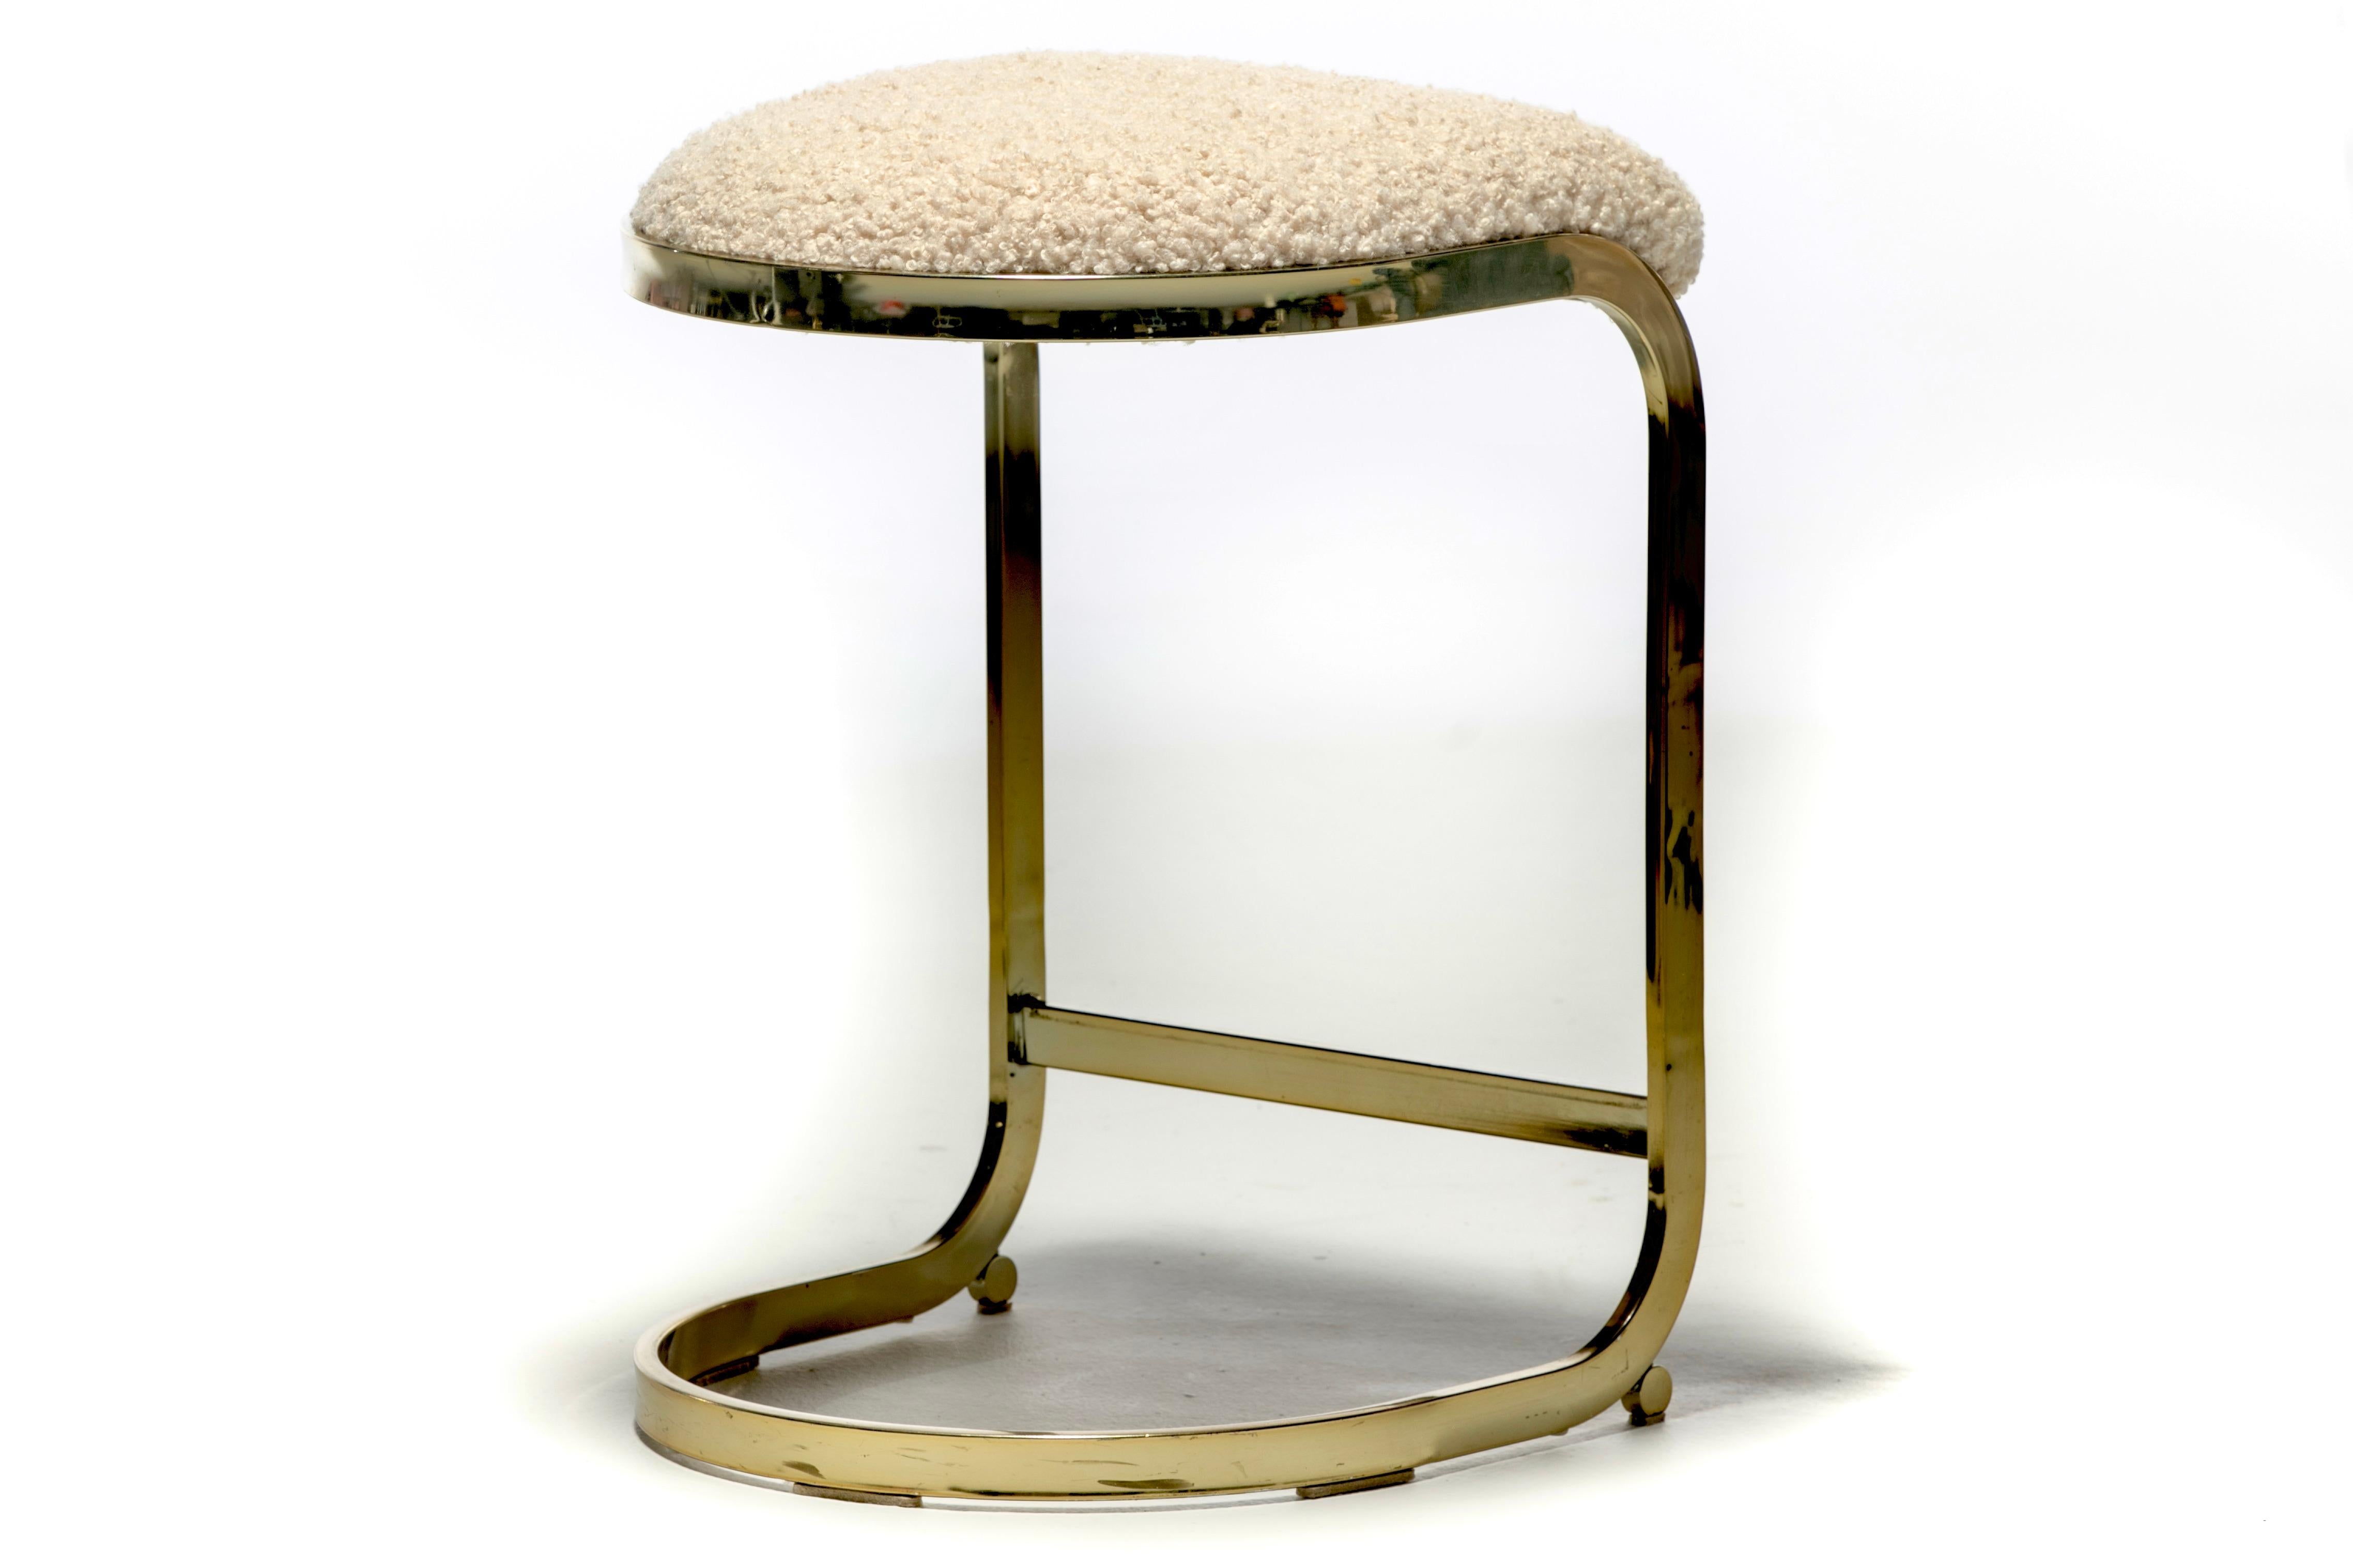 Set of 3 Design Institute of America Brass Stools in Ivory White Bouclé, c. 1980 For Sale 4